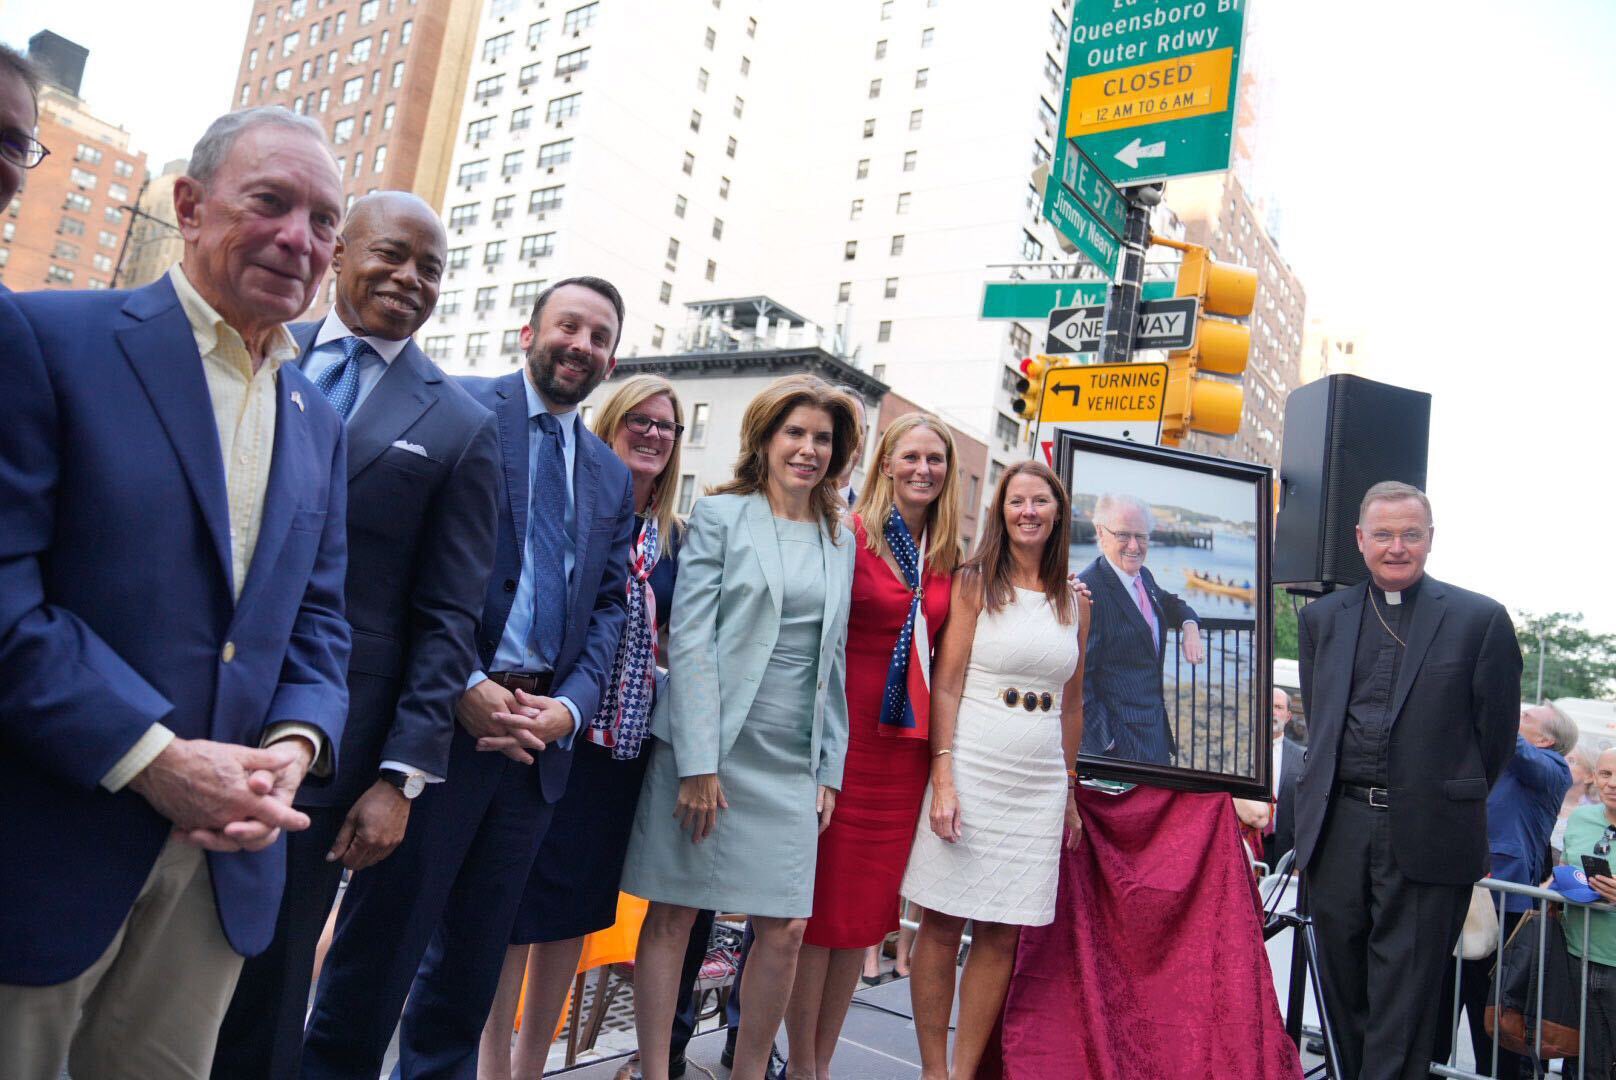 The Jimmy Neary Way naming ceremony in New York City